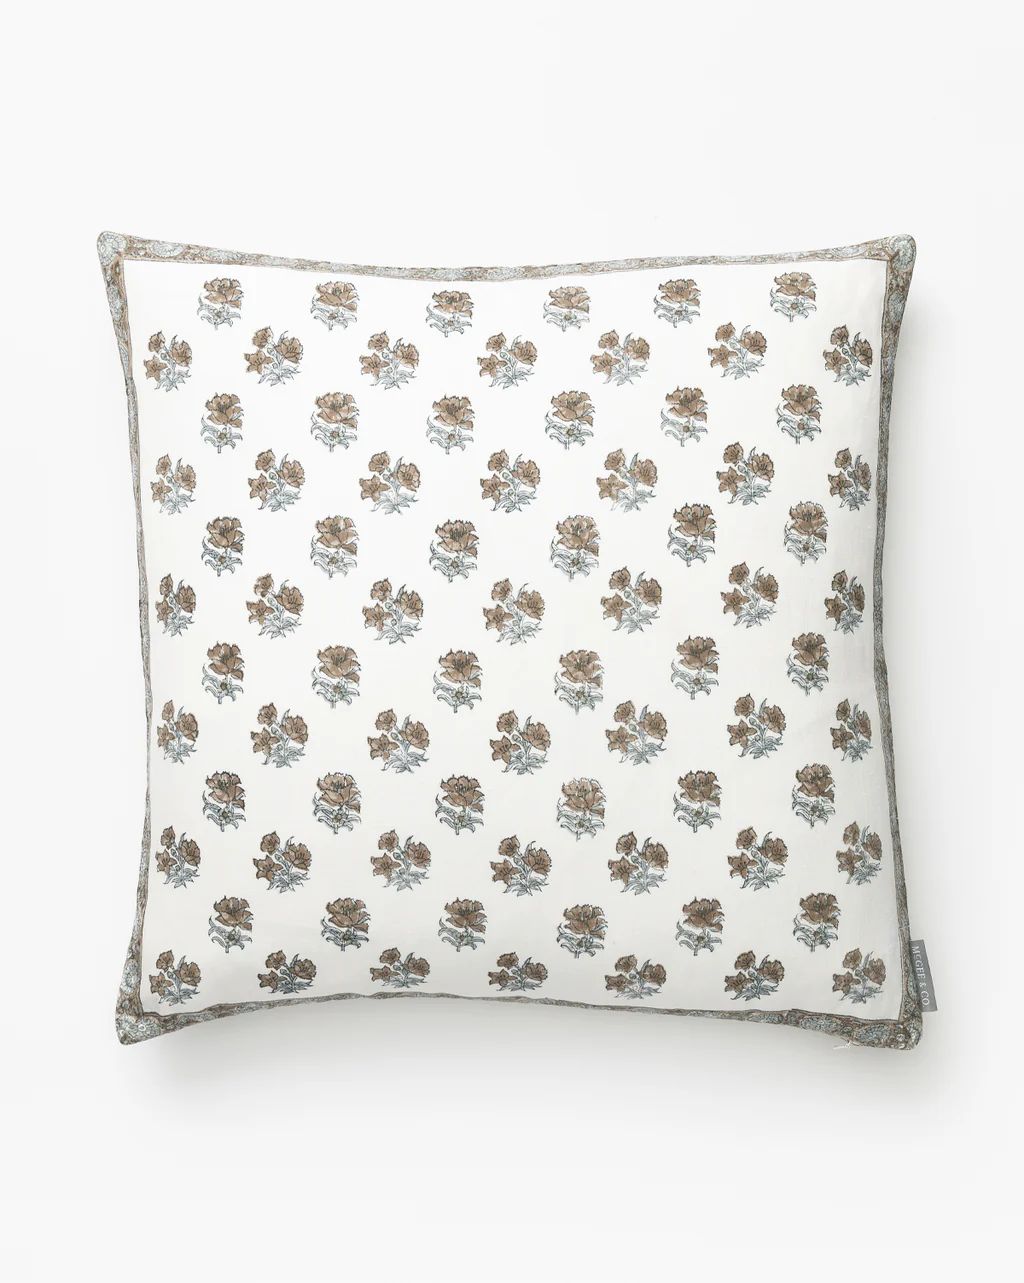 Louetta Pillow Cover | McGee & Co.